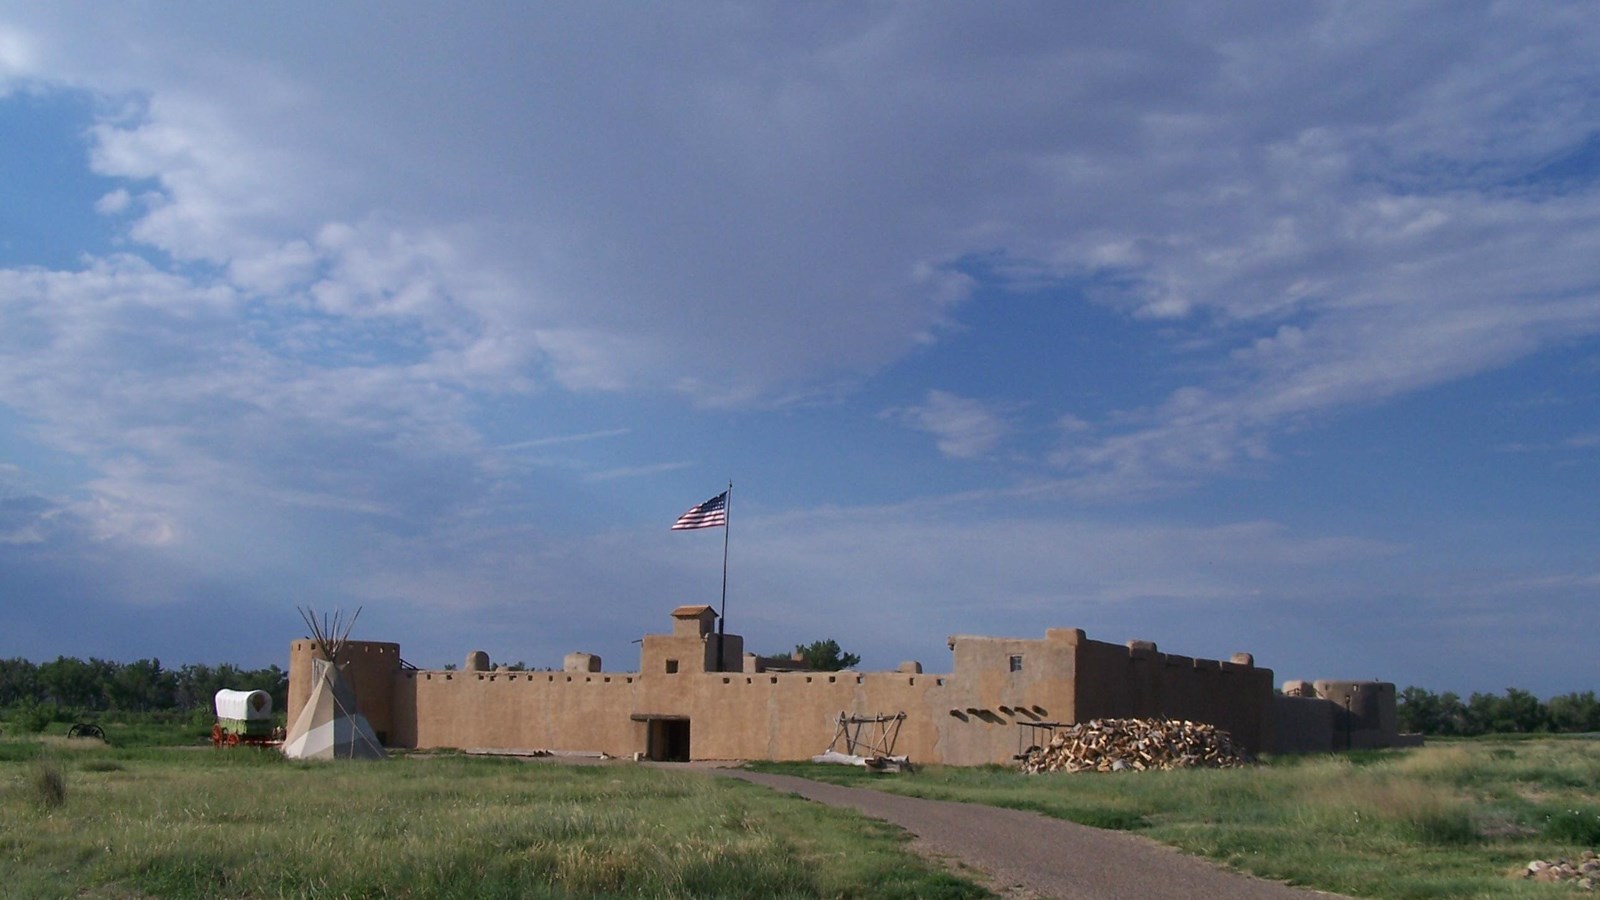 Large adobe fort with American flag flying above and a covered wagon, tepee, and path in front of it